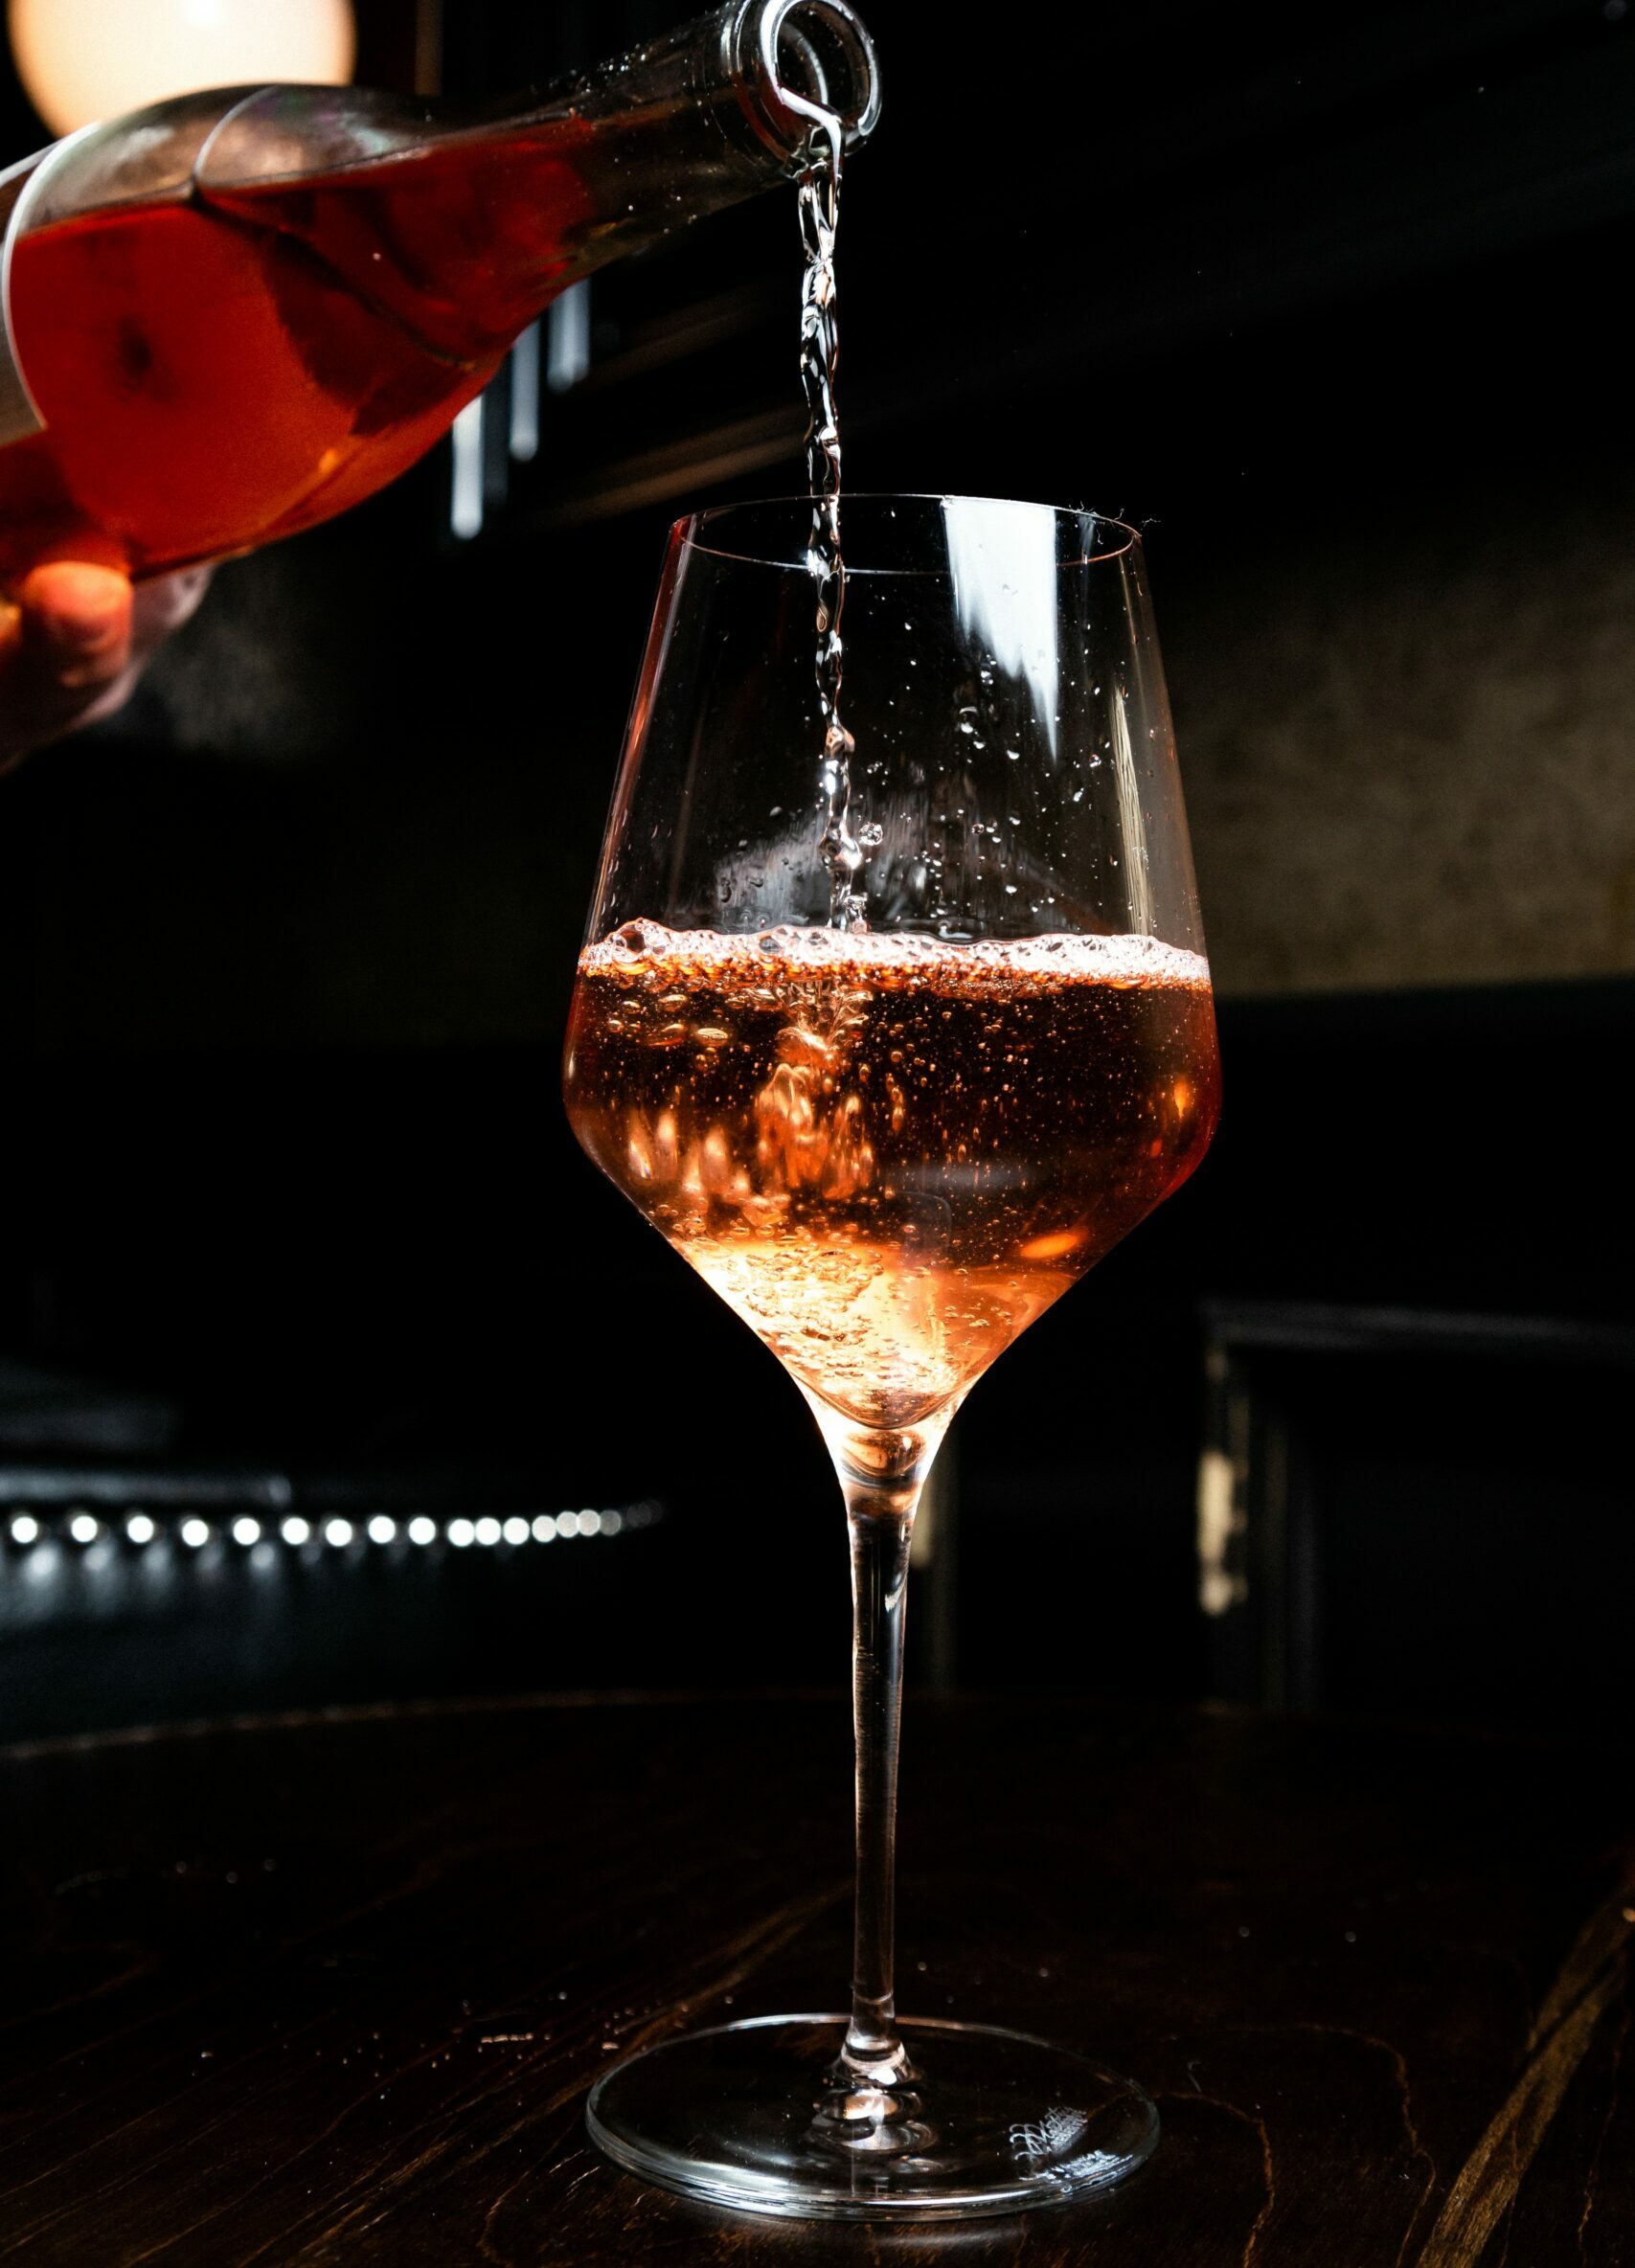 A hand in the top left of the frame pours a glass of pink rosé wine into a big wine glass. The glass is about halfway full. National rosé Day